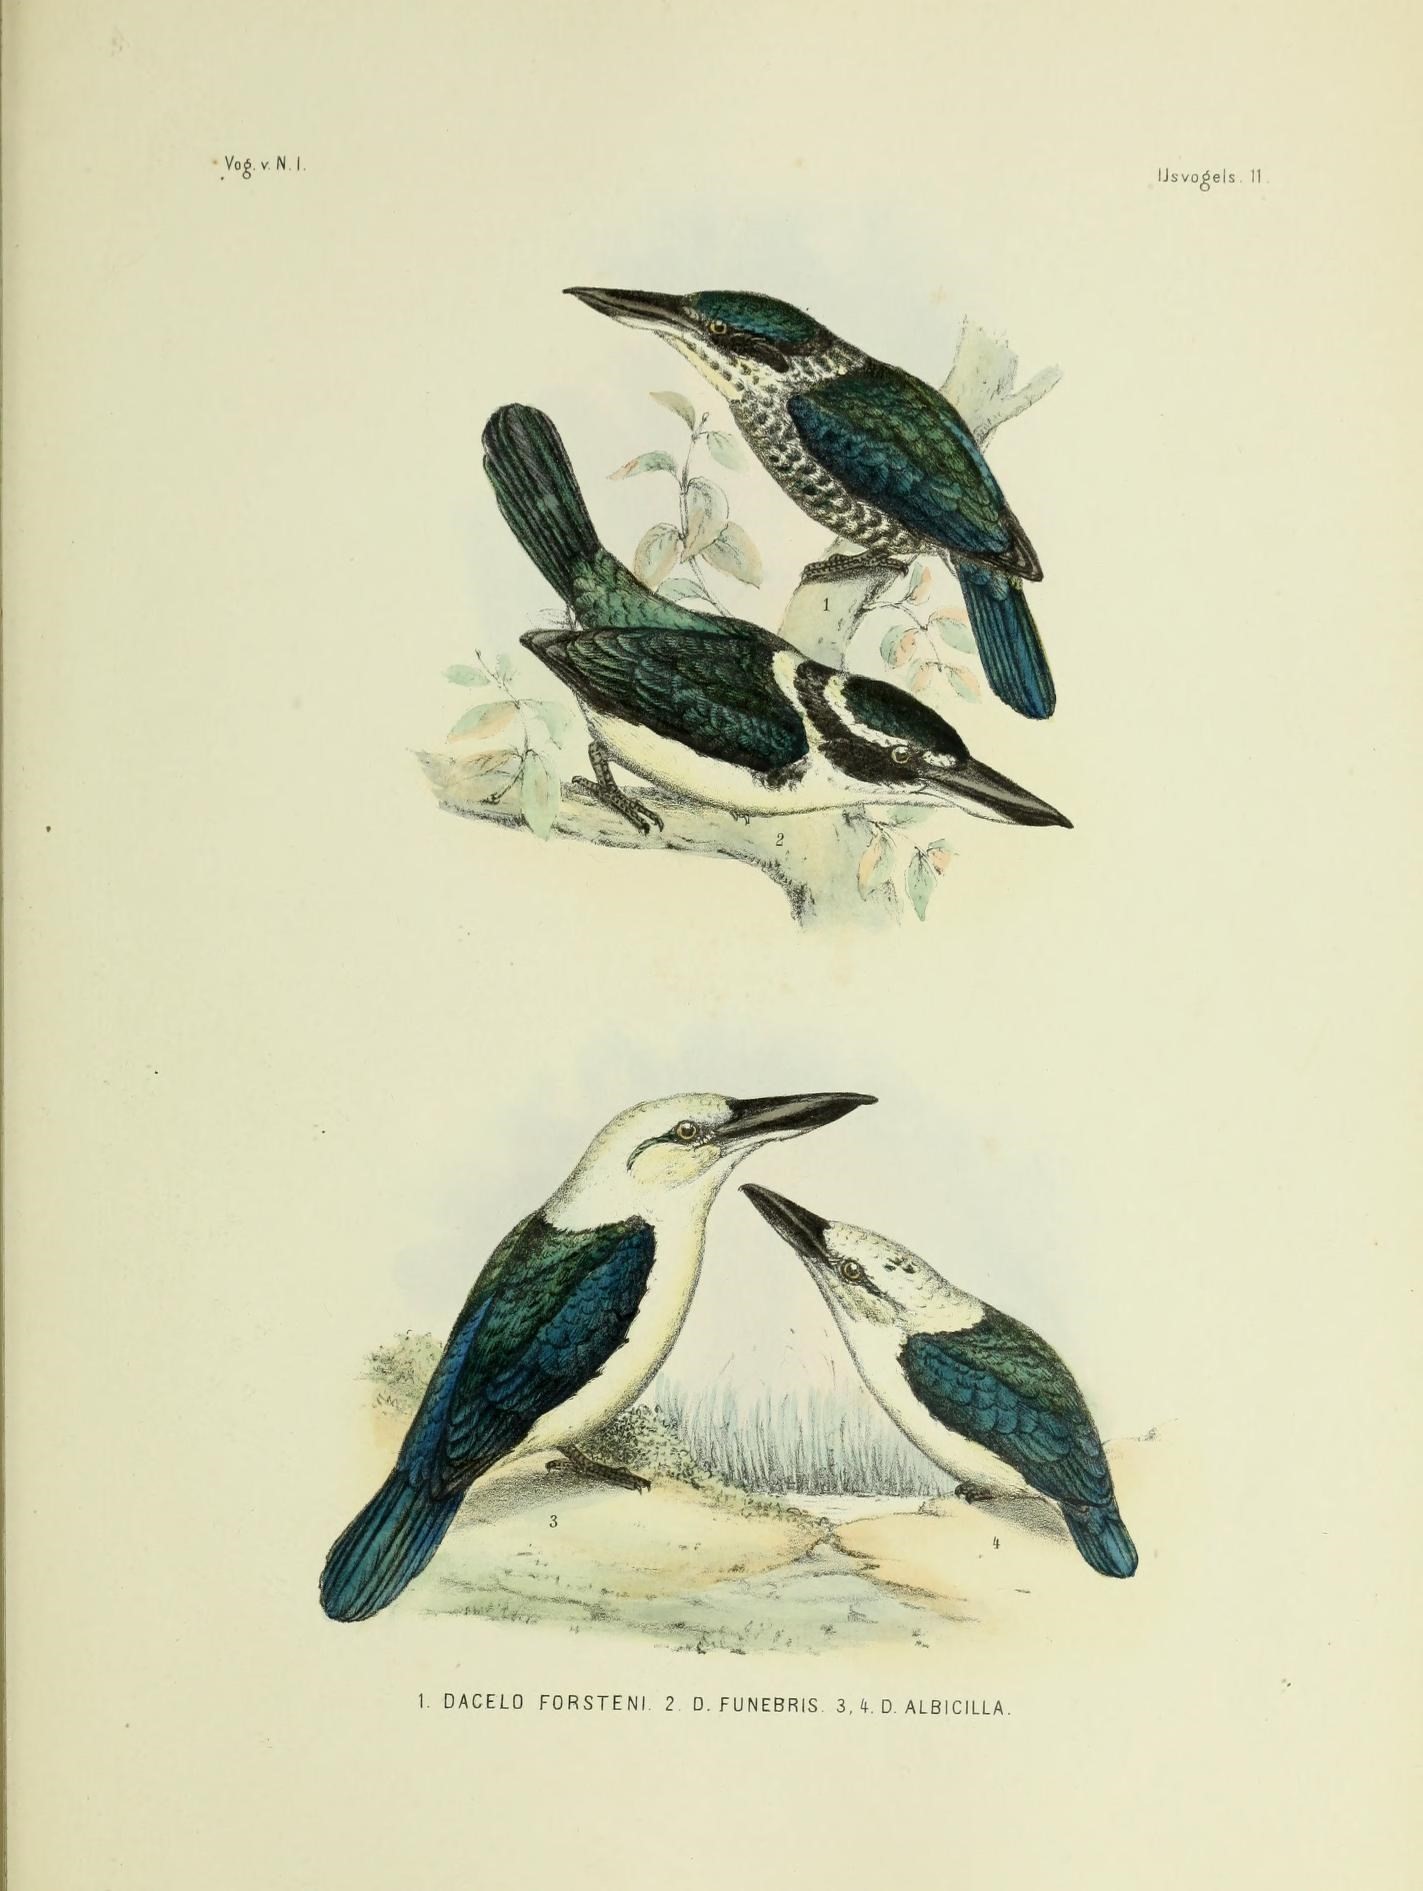 Image of Collared Kingfisher